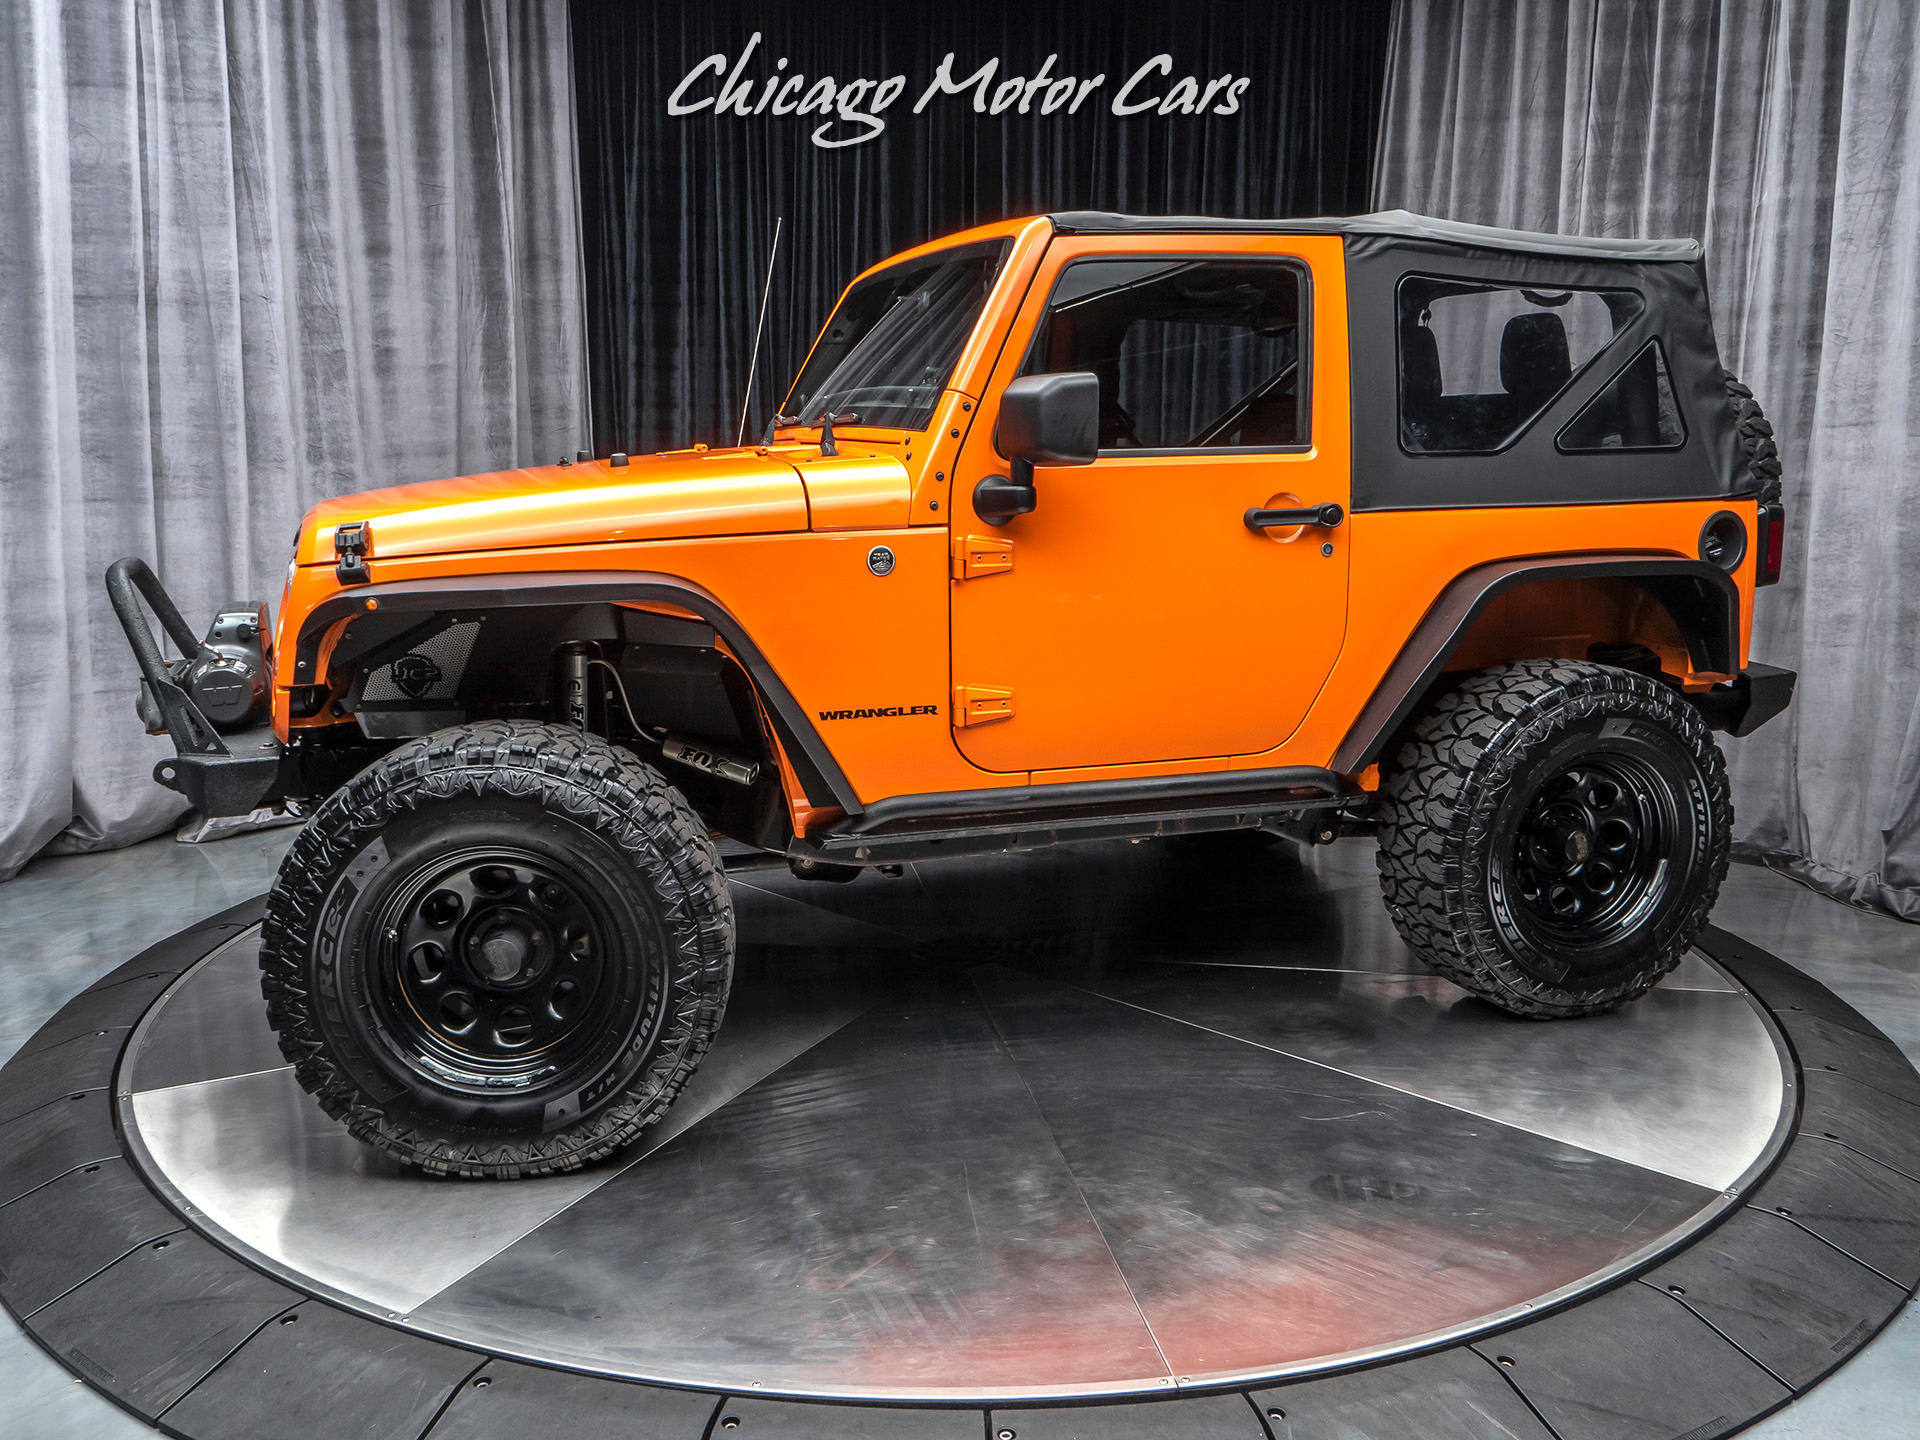 Used 2012 Jeep Wrangler 4x4 For Sale (Special Pricing) | Chicago Motor Cars  Stock #16117